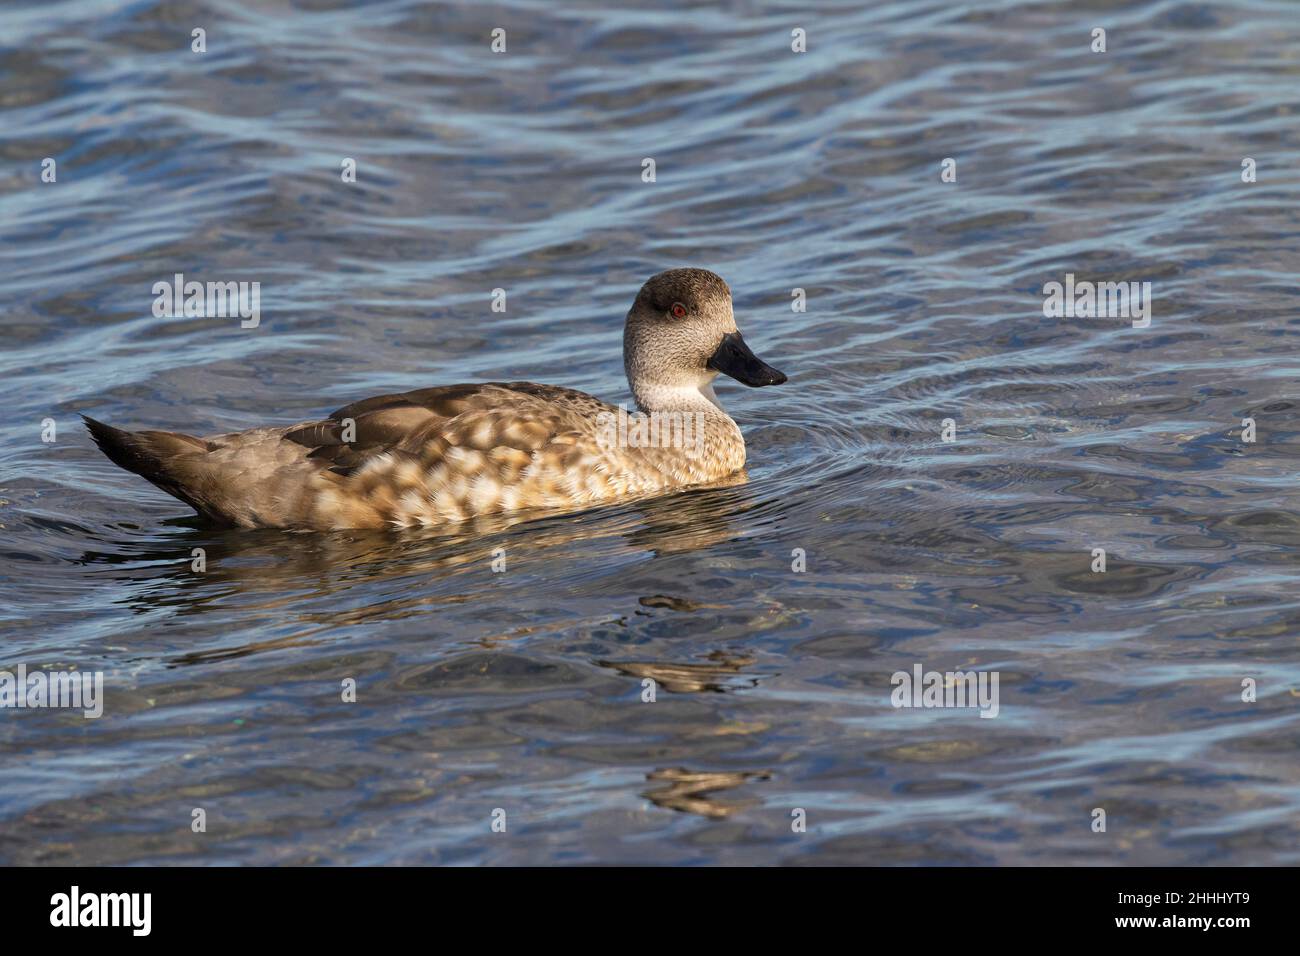 Crested duck Lophonetta specularioides specularioides swimming on sea, Falkland Islands Stock Photo